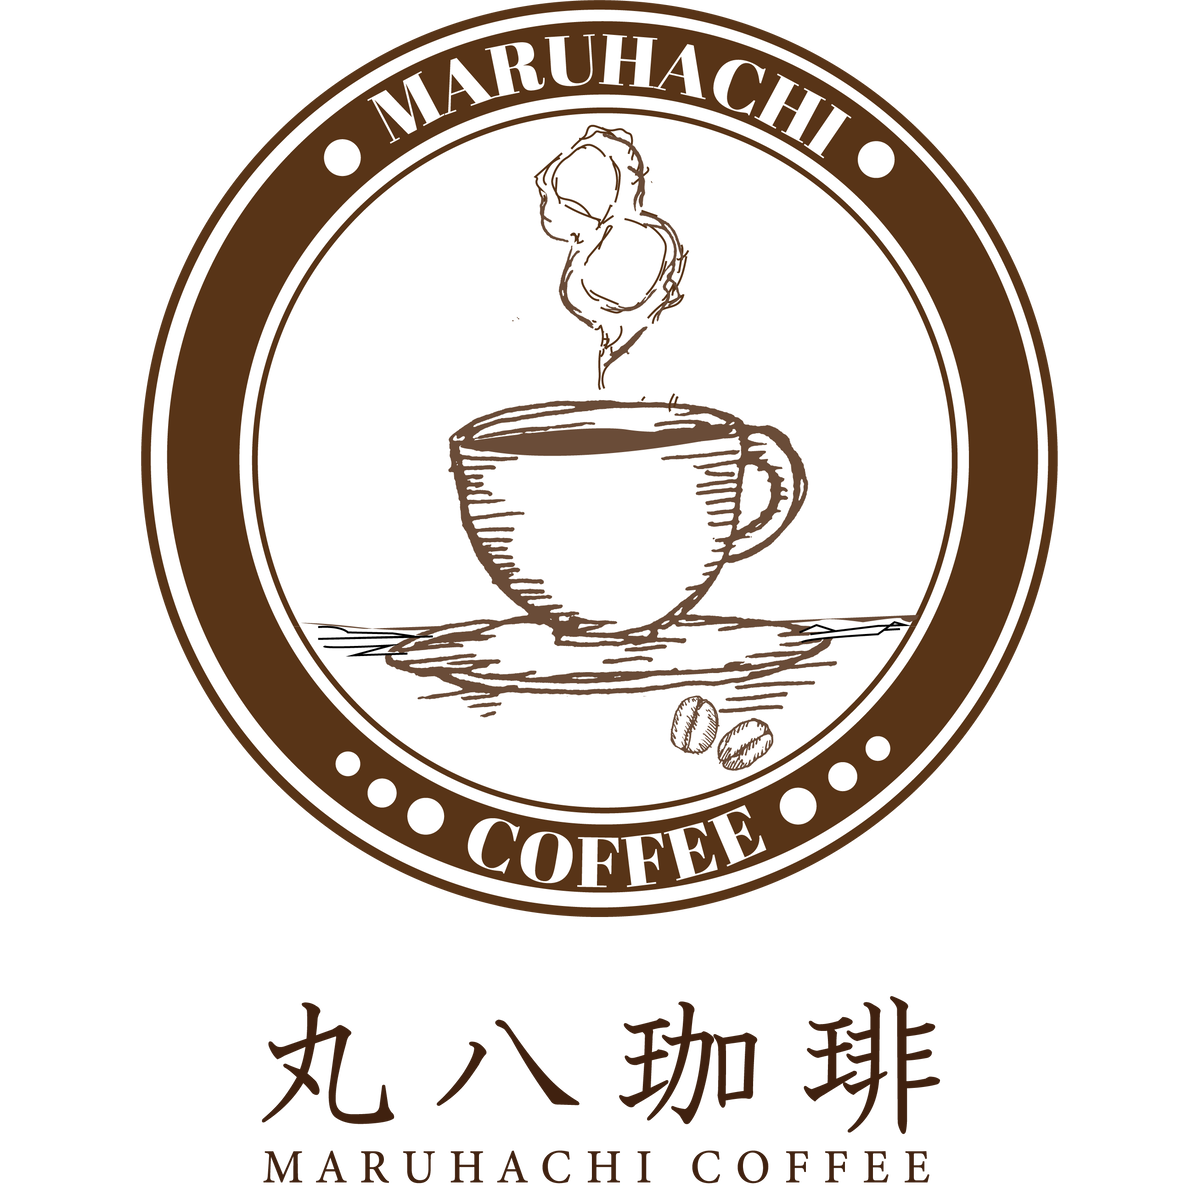 About 丸八珈琲 Maruhachi Coffee